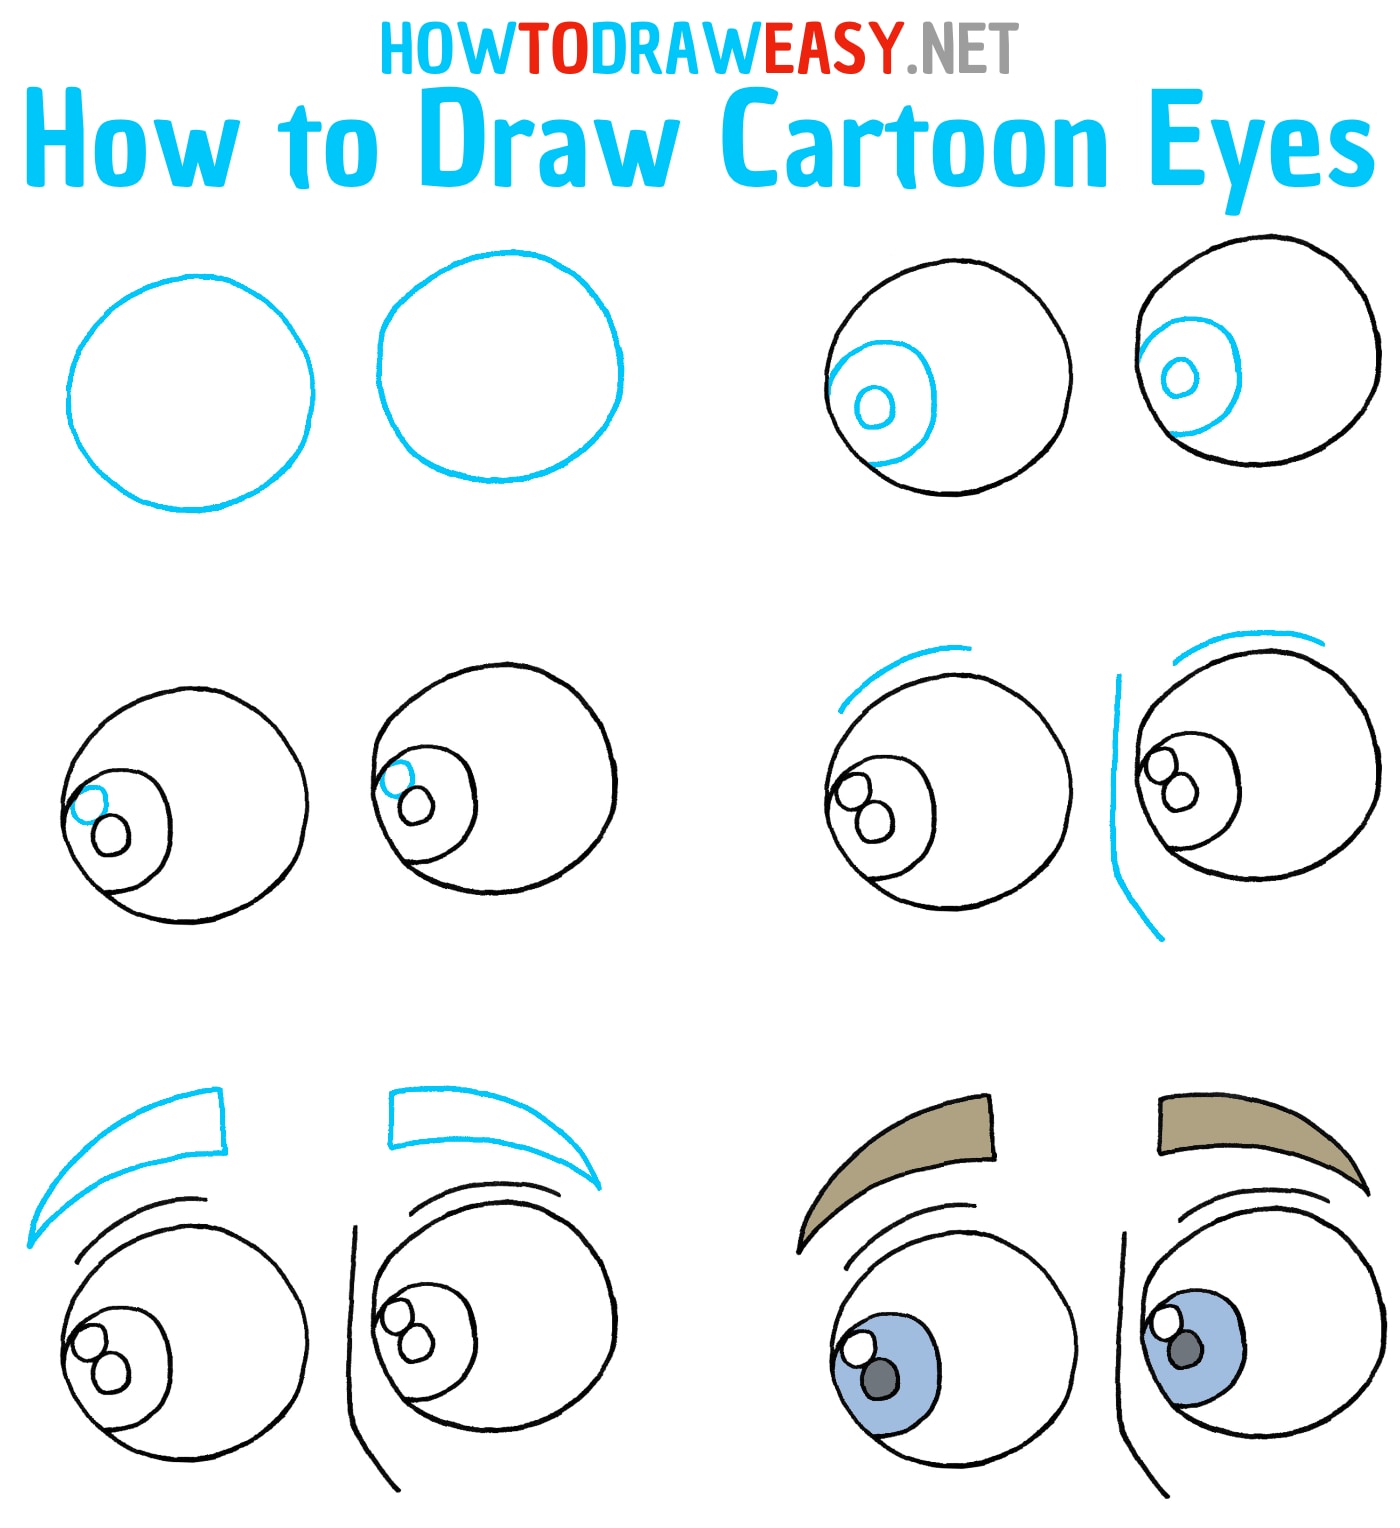 How to Draw Cartoon Eyes Step by Step